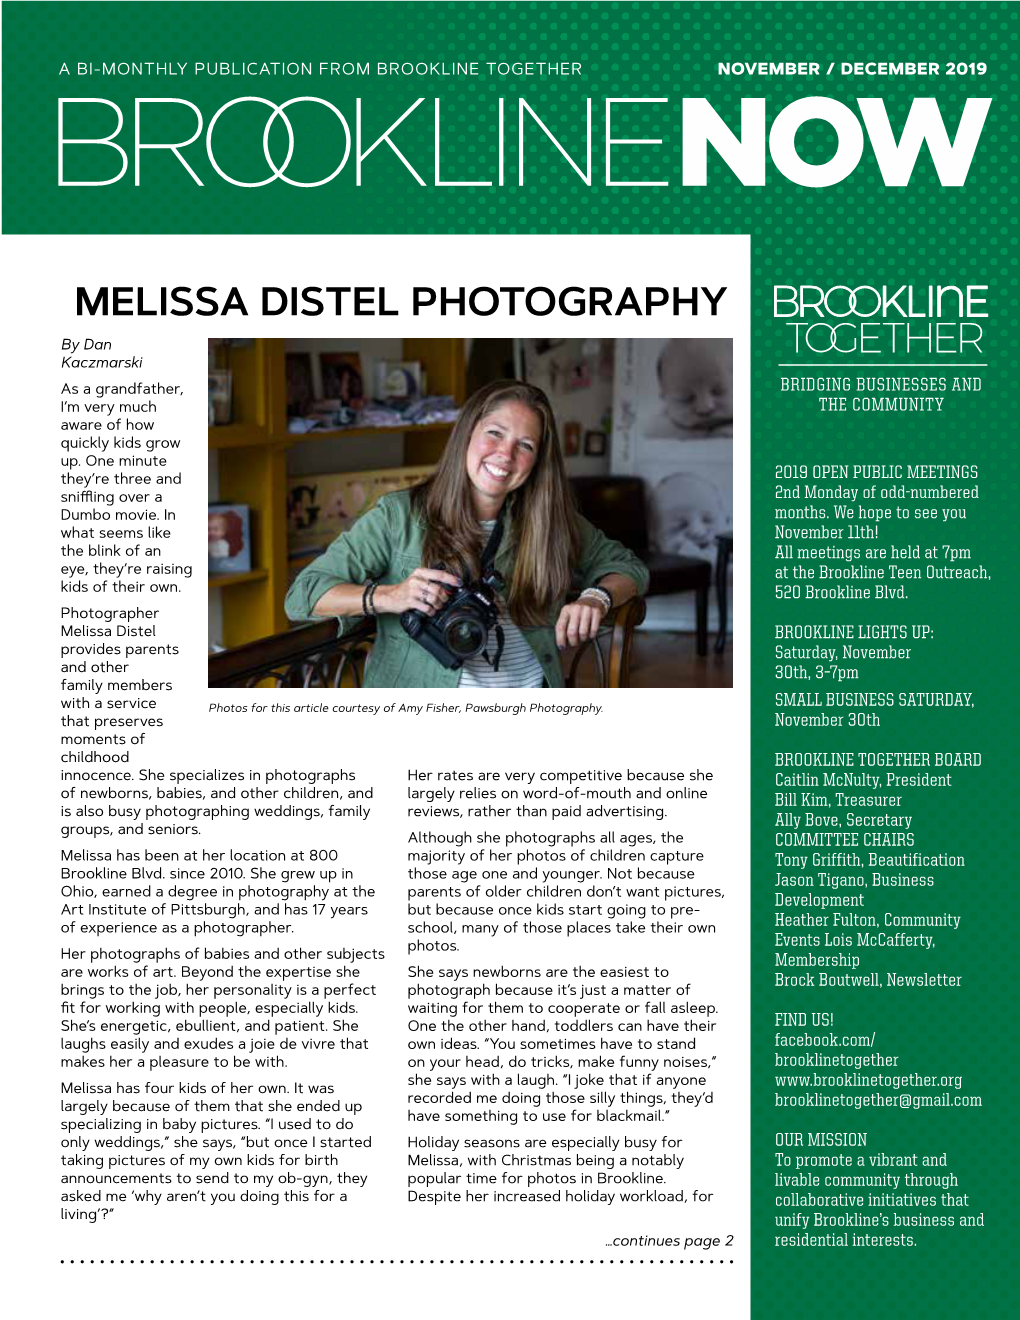 MELISSA DISTEL PHOTOGRAPHY by Dan Kaczmarski As a Grandfather, BRIDGING BUSINESSES and I’M Very Much the COMMUNITY Aware of How Quickly Kids Grow Up